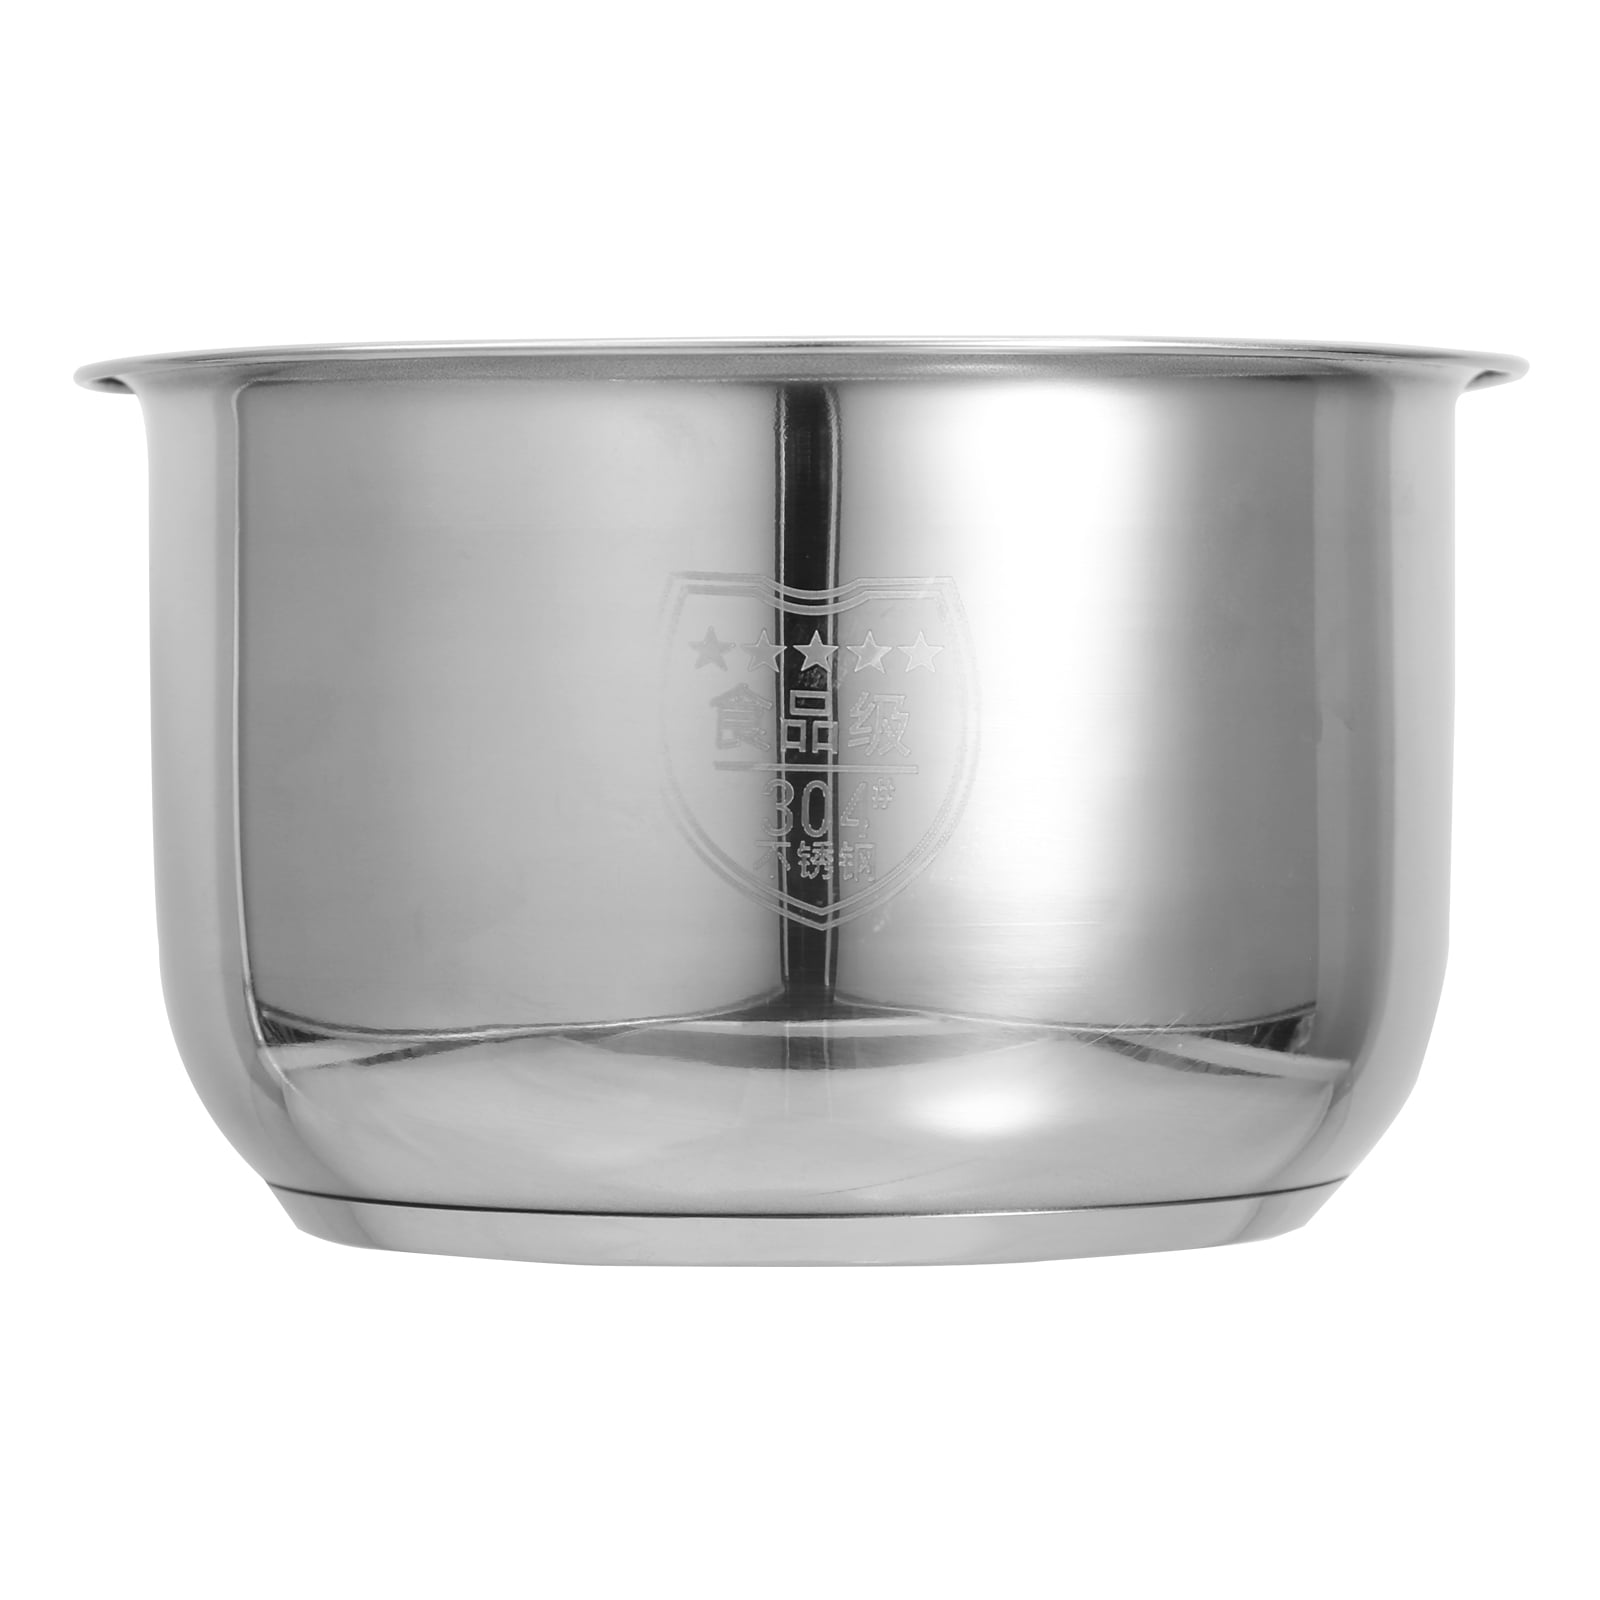 Inner Cooking Pot in stainless steal — Yedi Houseware Appliances